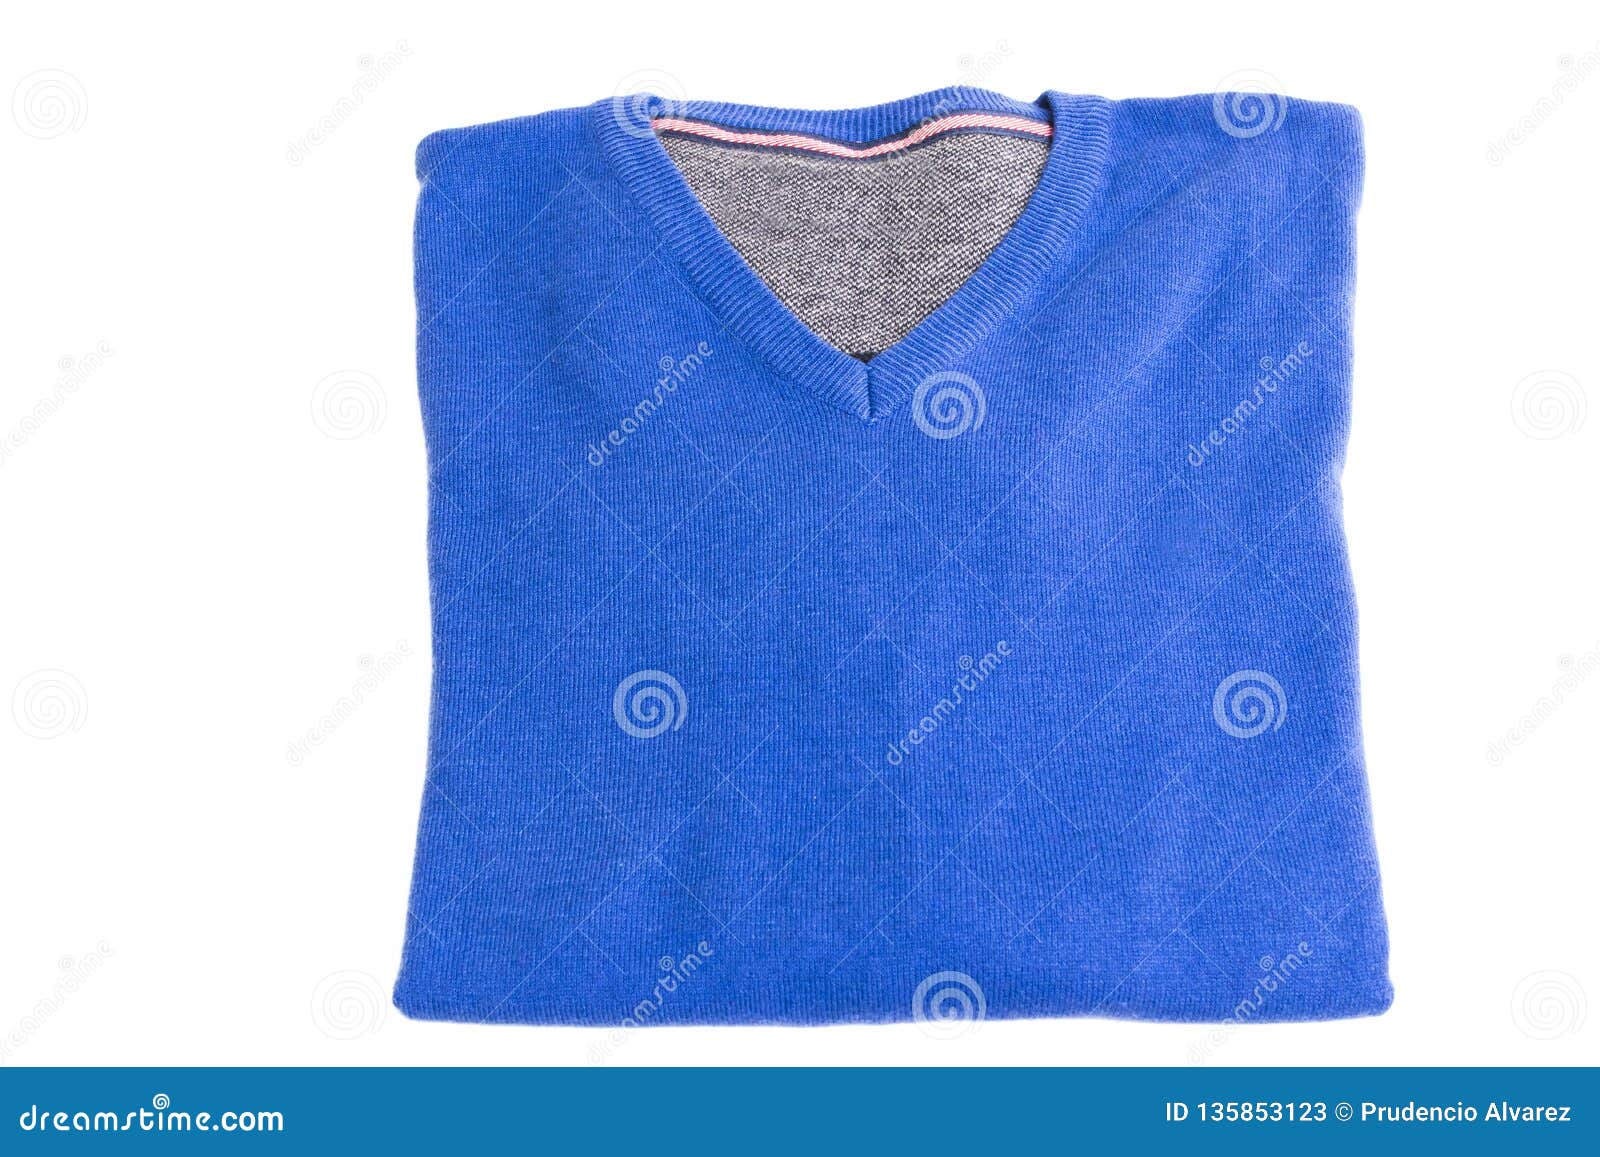 Jerseys isolated in white stock image. Image of garment - 135853123